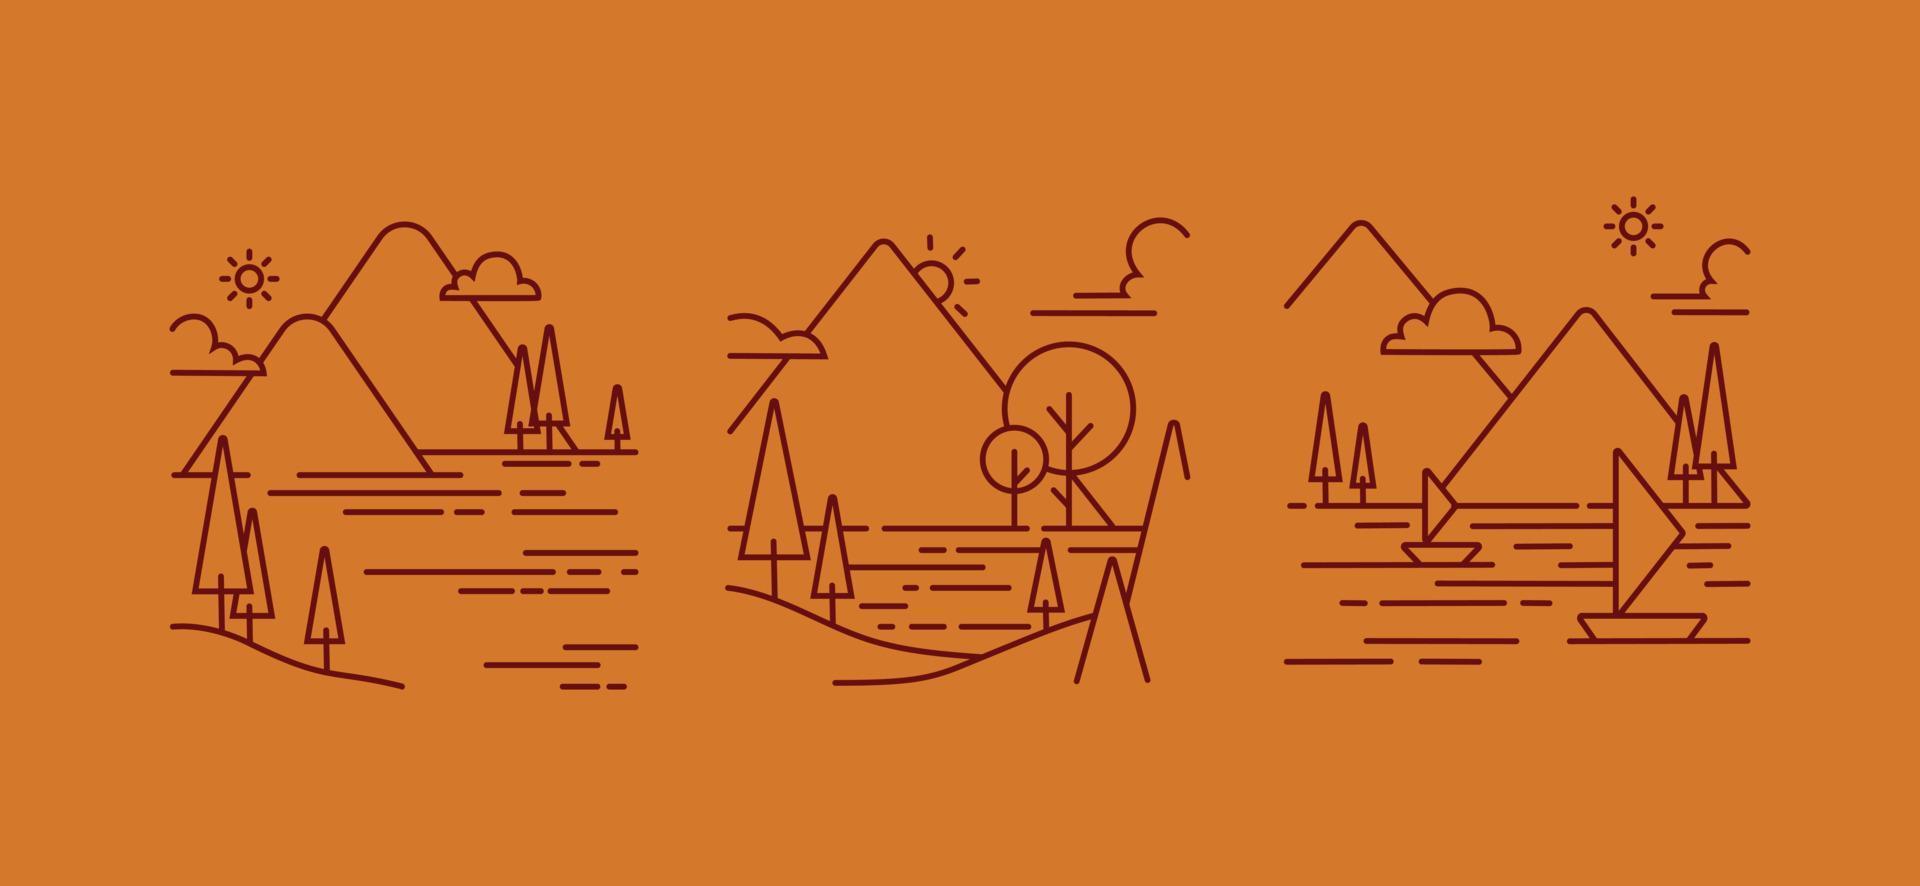 the landscape illustration in a simple monoline vector style on an orange. minimal drawing in creating a simple design.